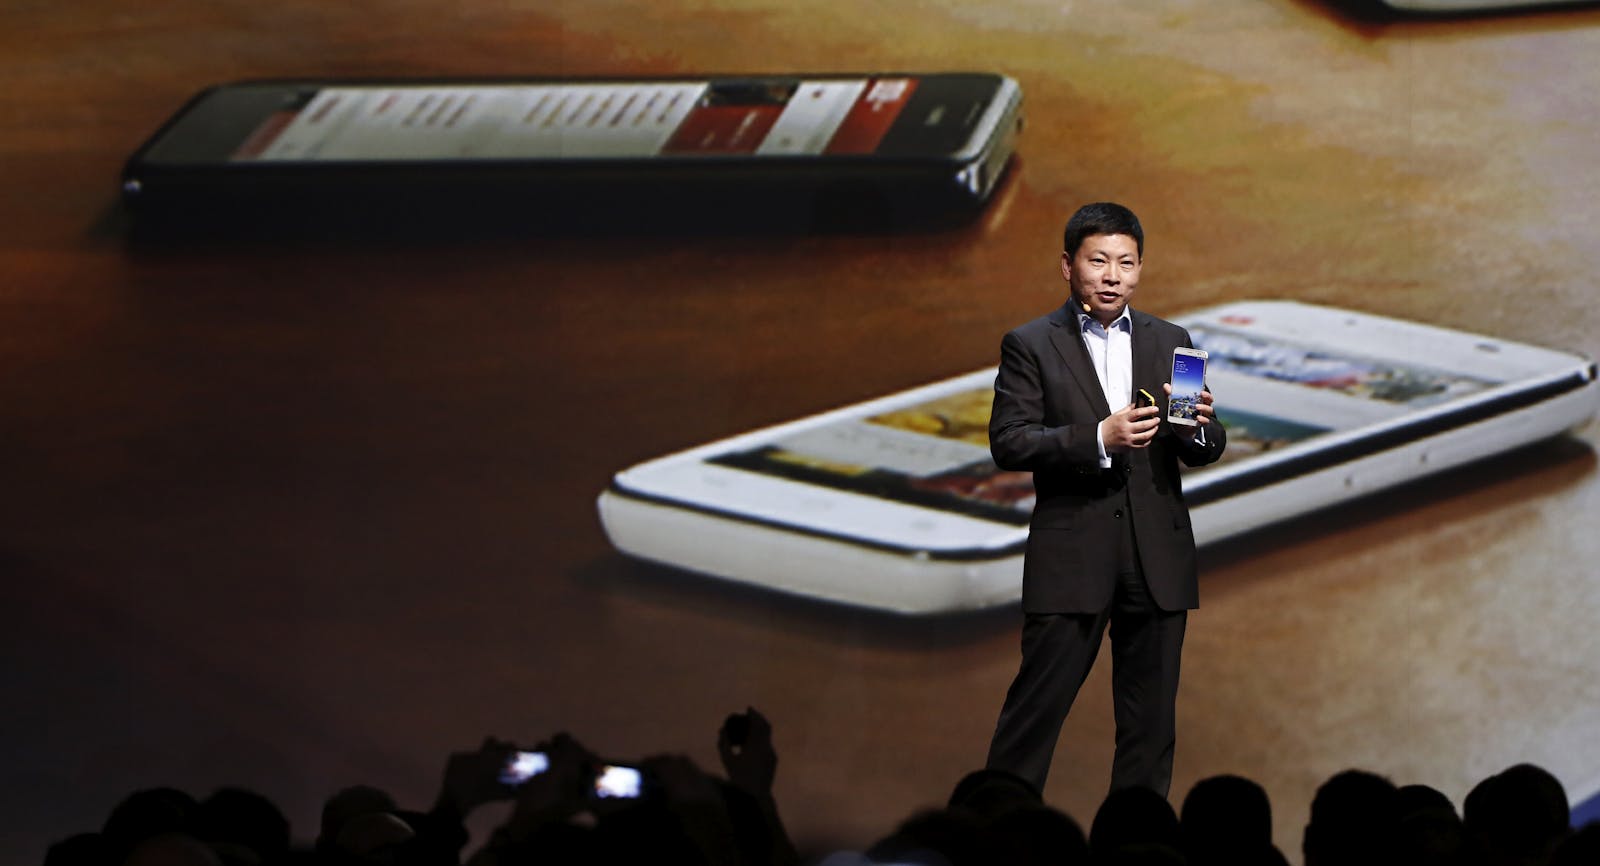 Richard Yu, who leads the devices group at Huawei Technologies. Photo by Bloomberg.